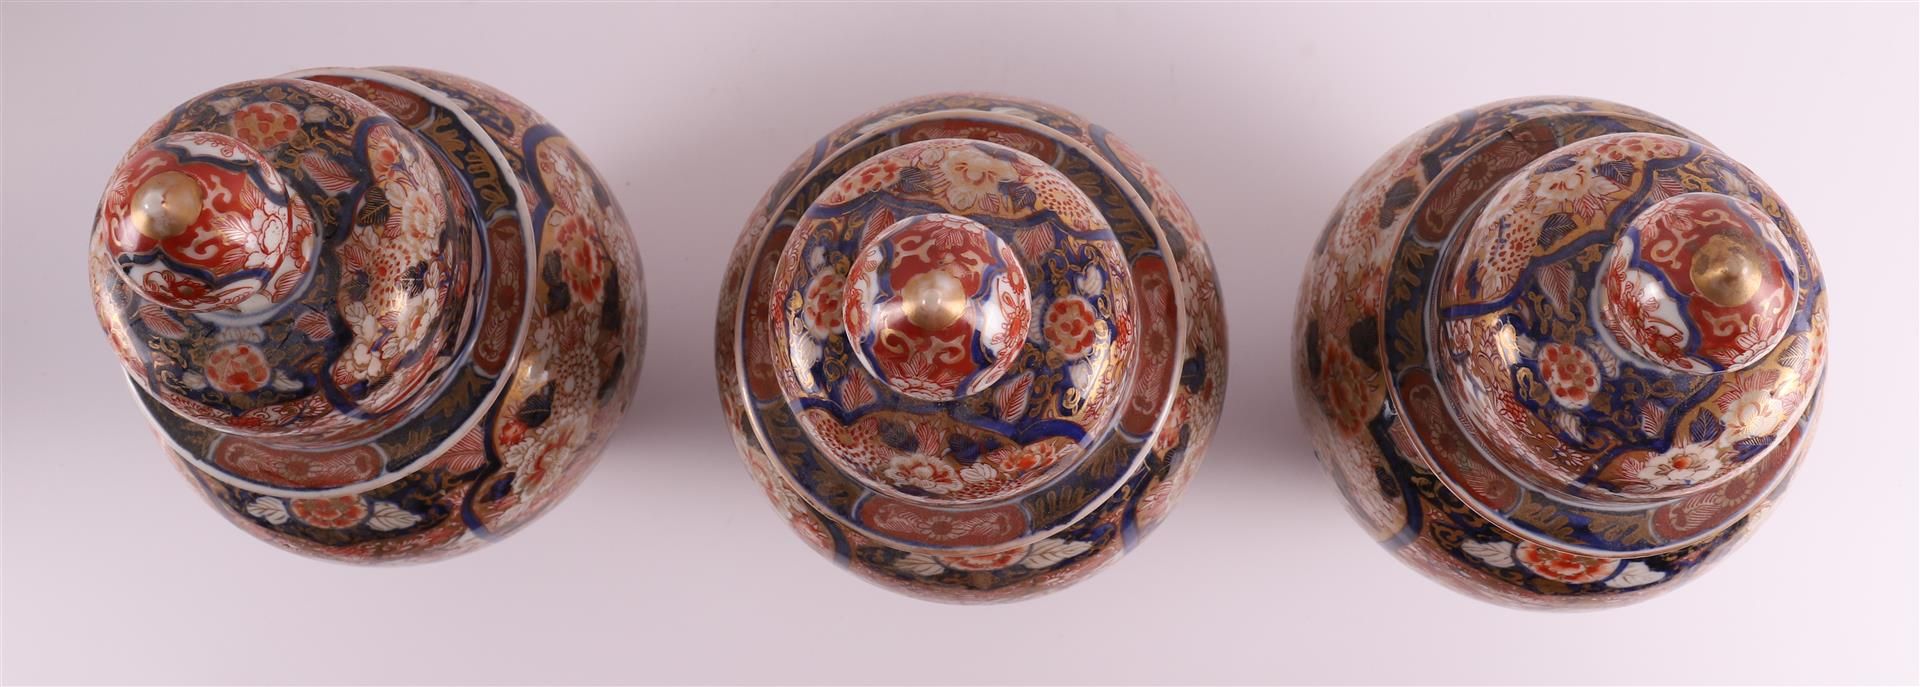 A five-piece porcelain Imari cabinet set, consisting of: three lidded vases and two vases with - Image 7 of 17